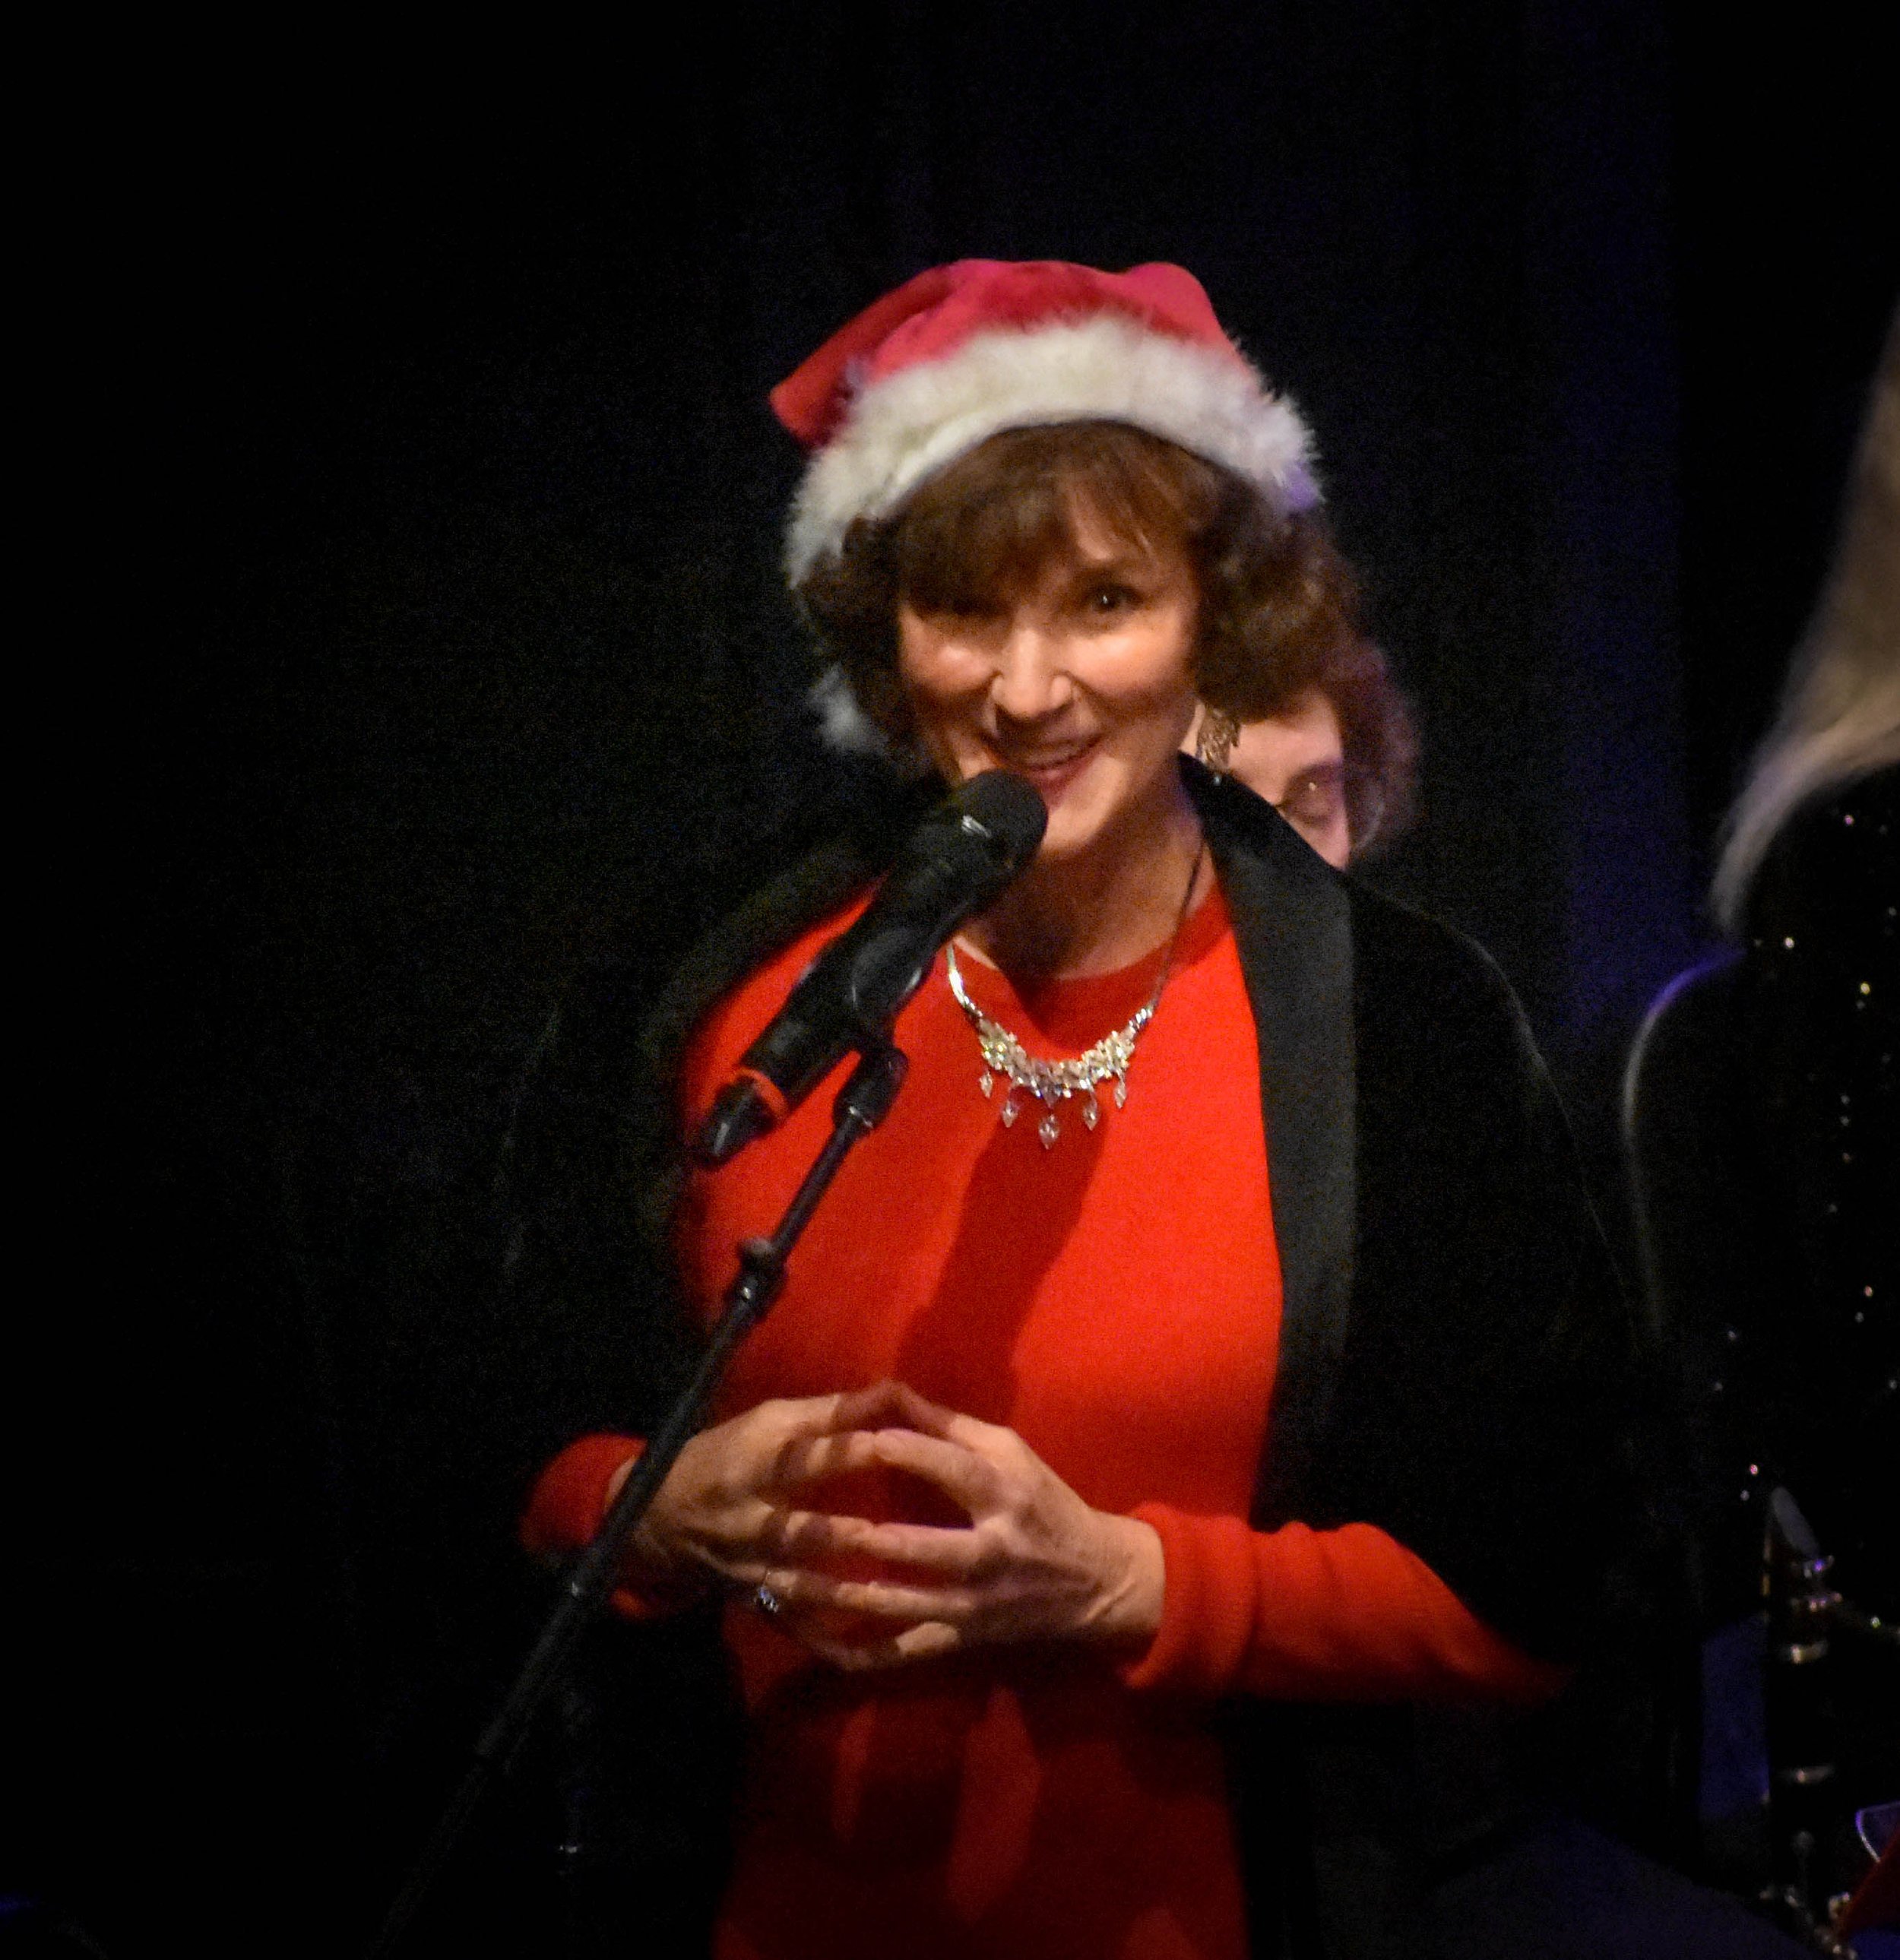 12-19-2021 LCB Holiday Concert by Peyton Webster68-25(1).jpg